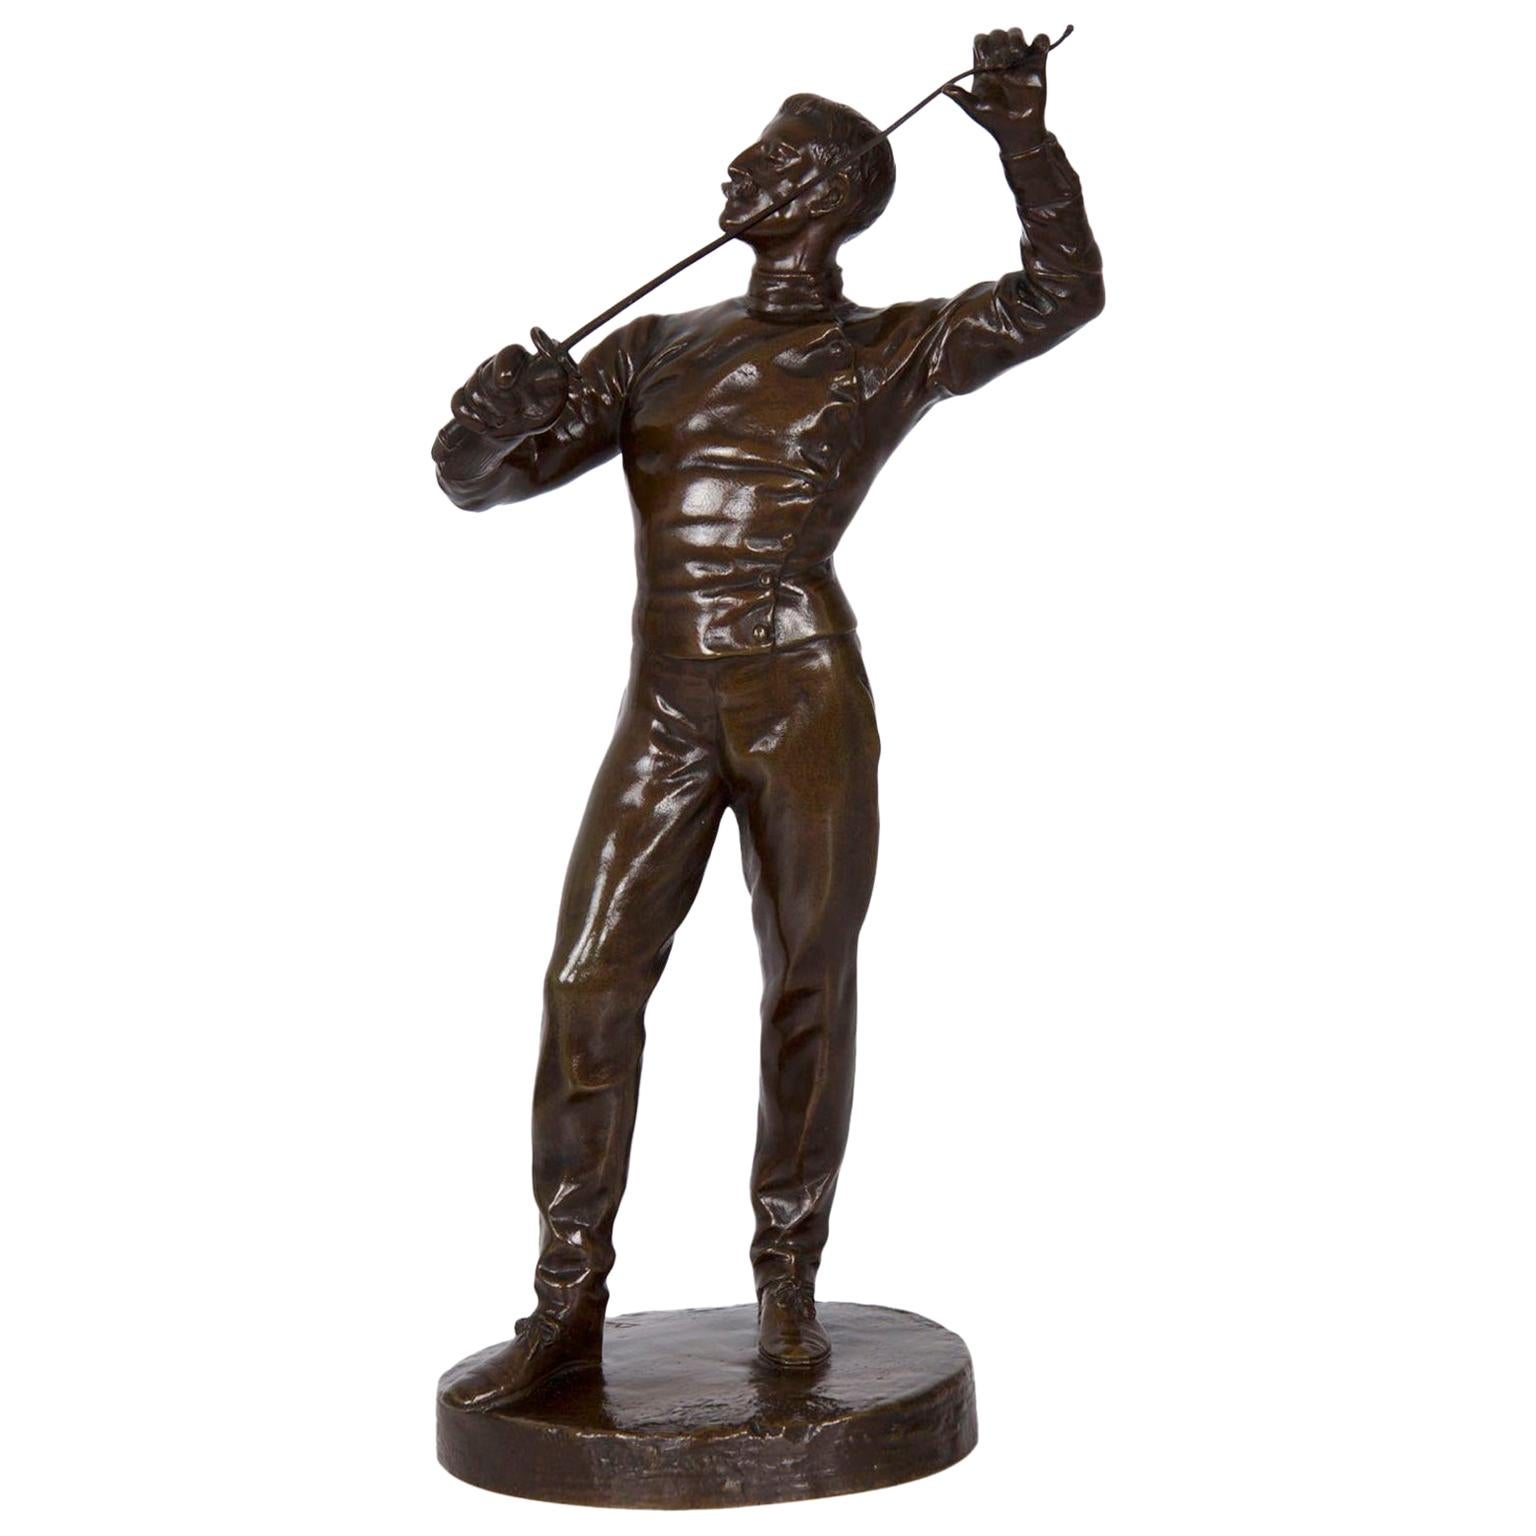 Antique French Bronze Sculpture of a Fencer by Benoit Rougelet